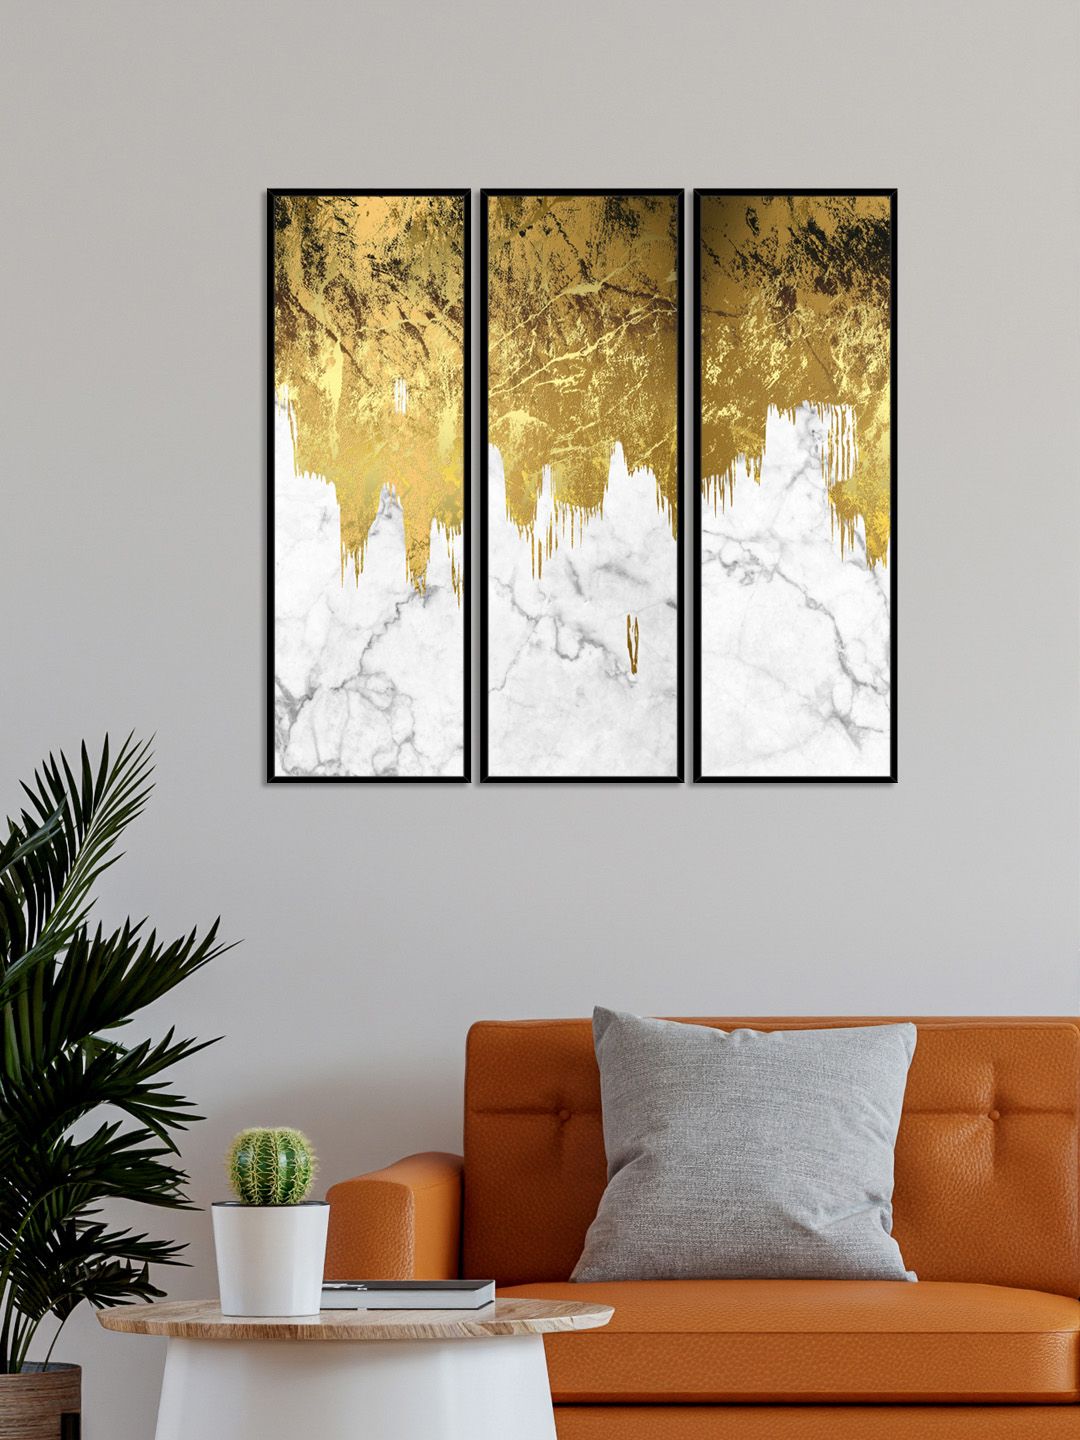 999Store Set Of 3 Gold-Toned & White Abstract Art Panels Wall Paintings Price in India